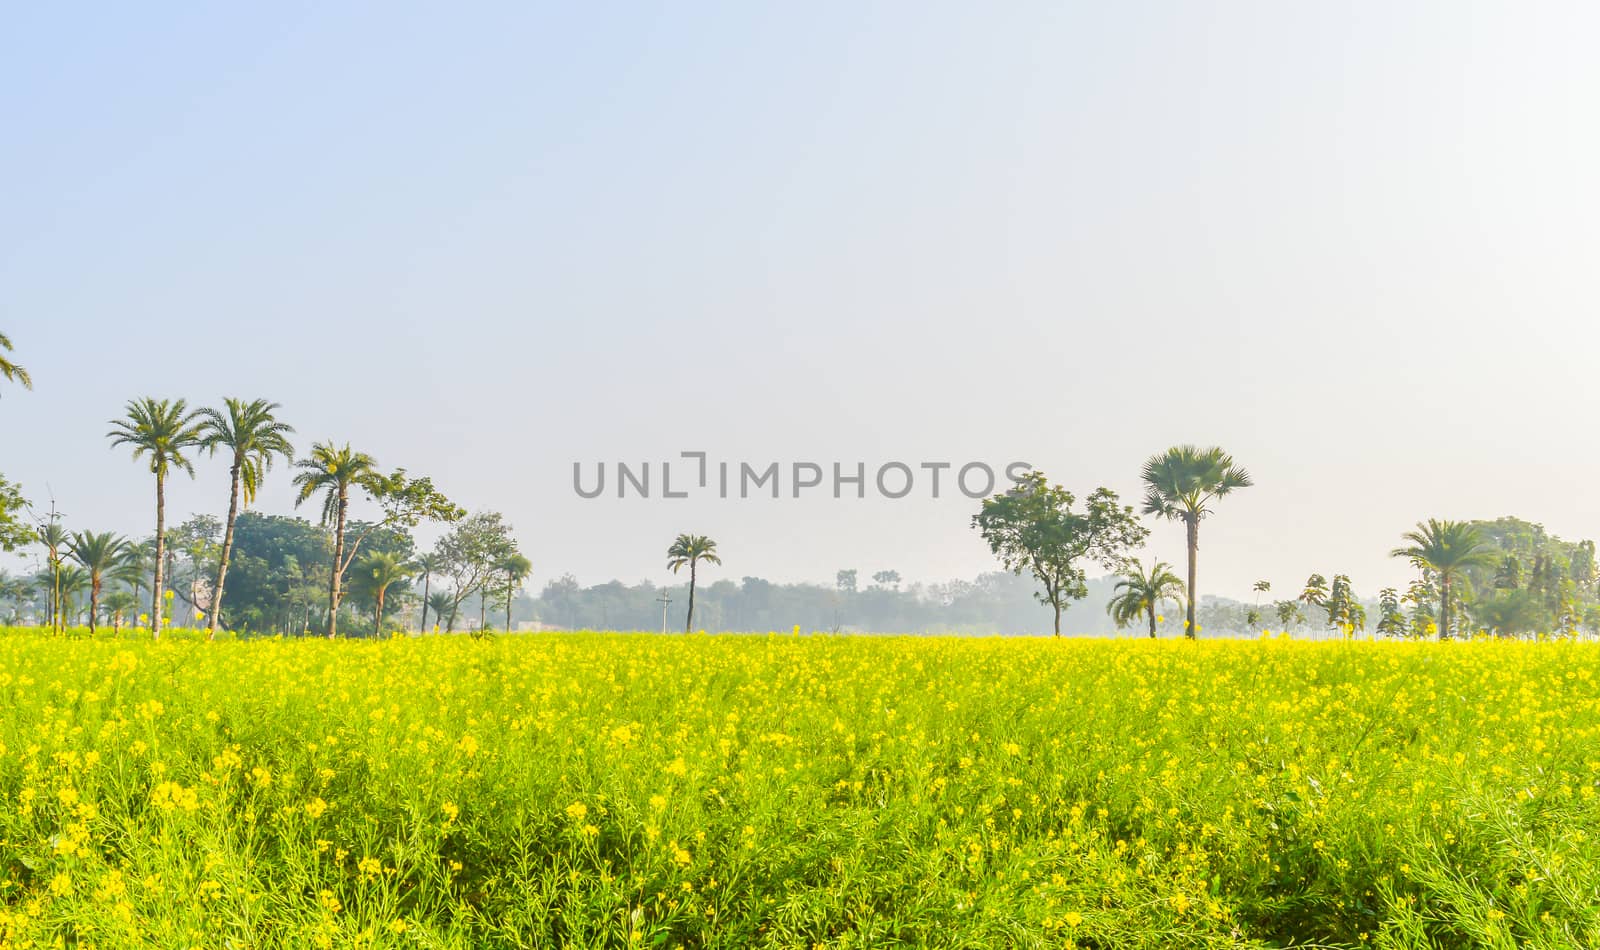 Colorful spring Landscape with yellow Rape: This is a photograph of Beautiful rapeseed flower field captured from a Sunny field of rape flower garden.. The image taken at dusk, at dawn, at daytime on a cloudy day. The Subject of the image is inspiration, exciting, hopeful, bright, sensational, tranquil, calm, and stunning. This photography is taken in as landscape style. This photograph may be used as a background, wallpaper, screen saver.